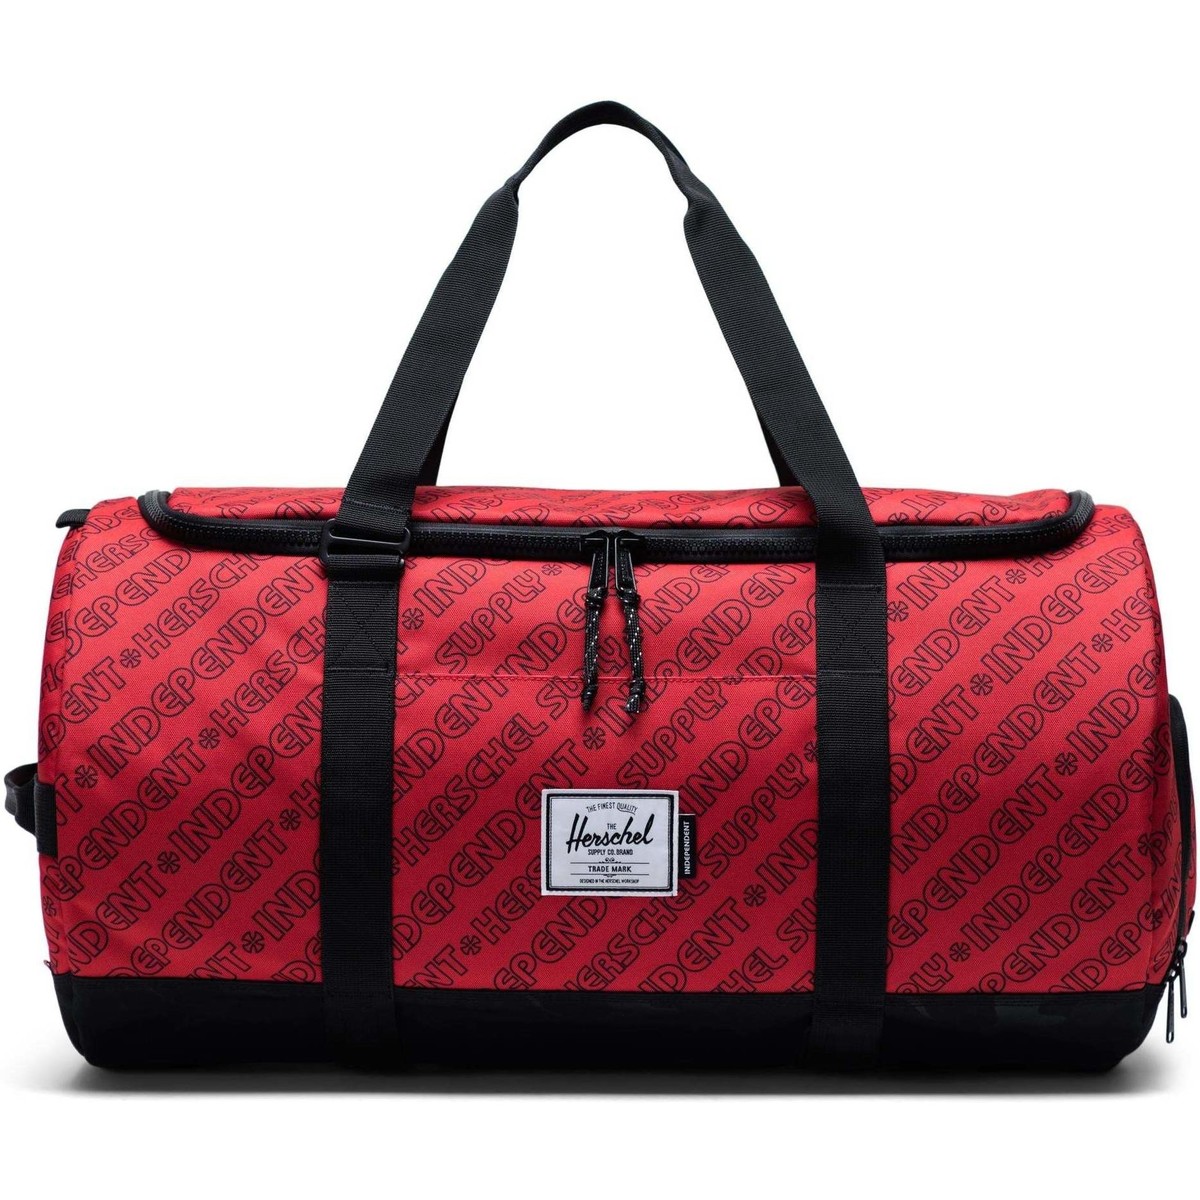 Sacs Culottes & autres bas Herschel Sutton Carryall Independent Unified Red/Black Camo Rouge